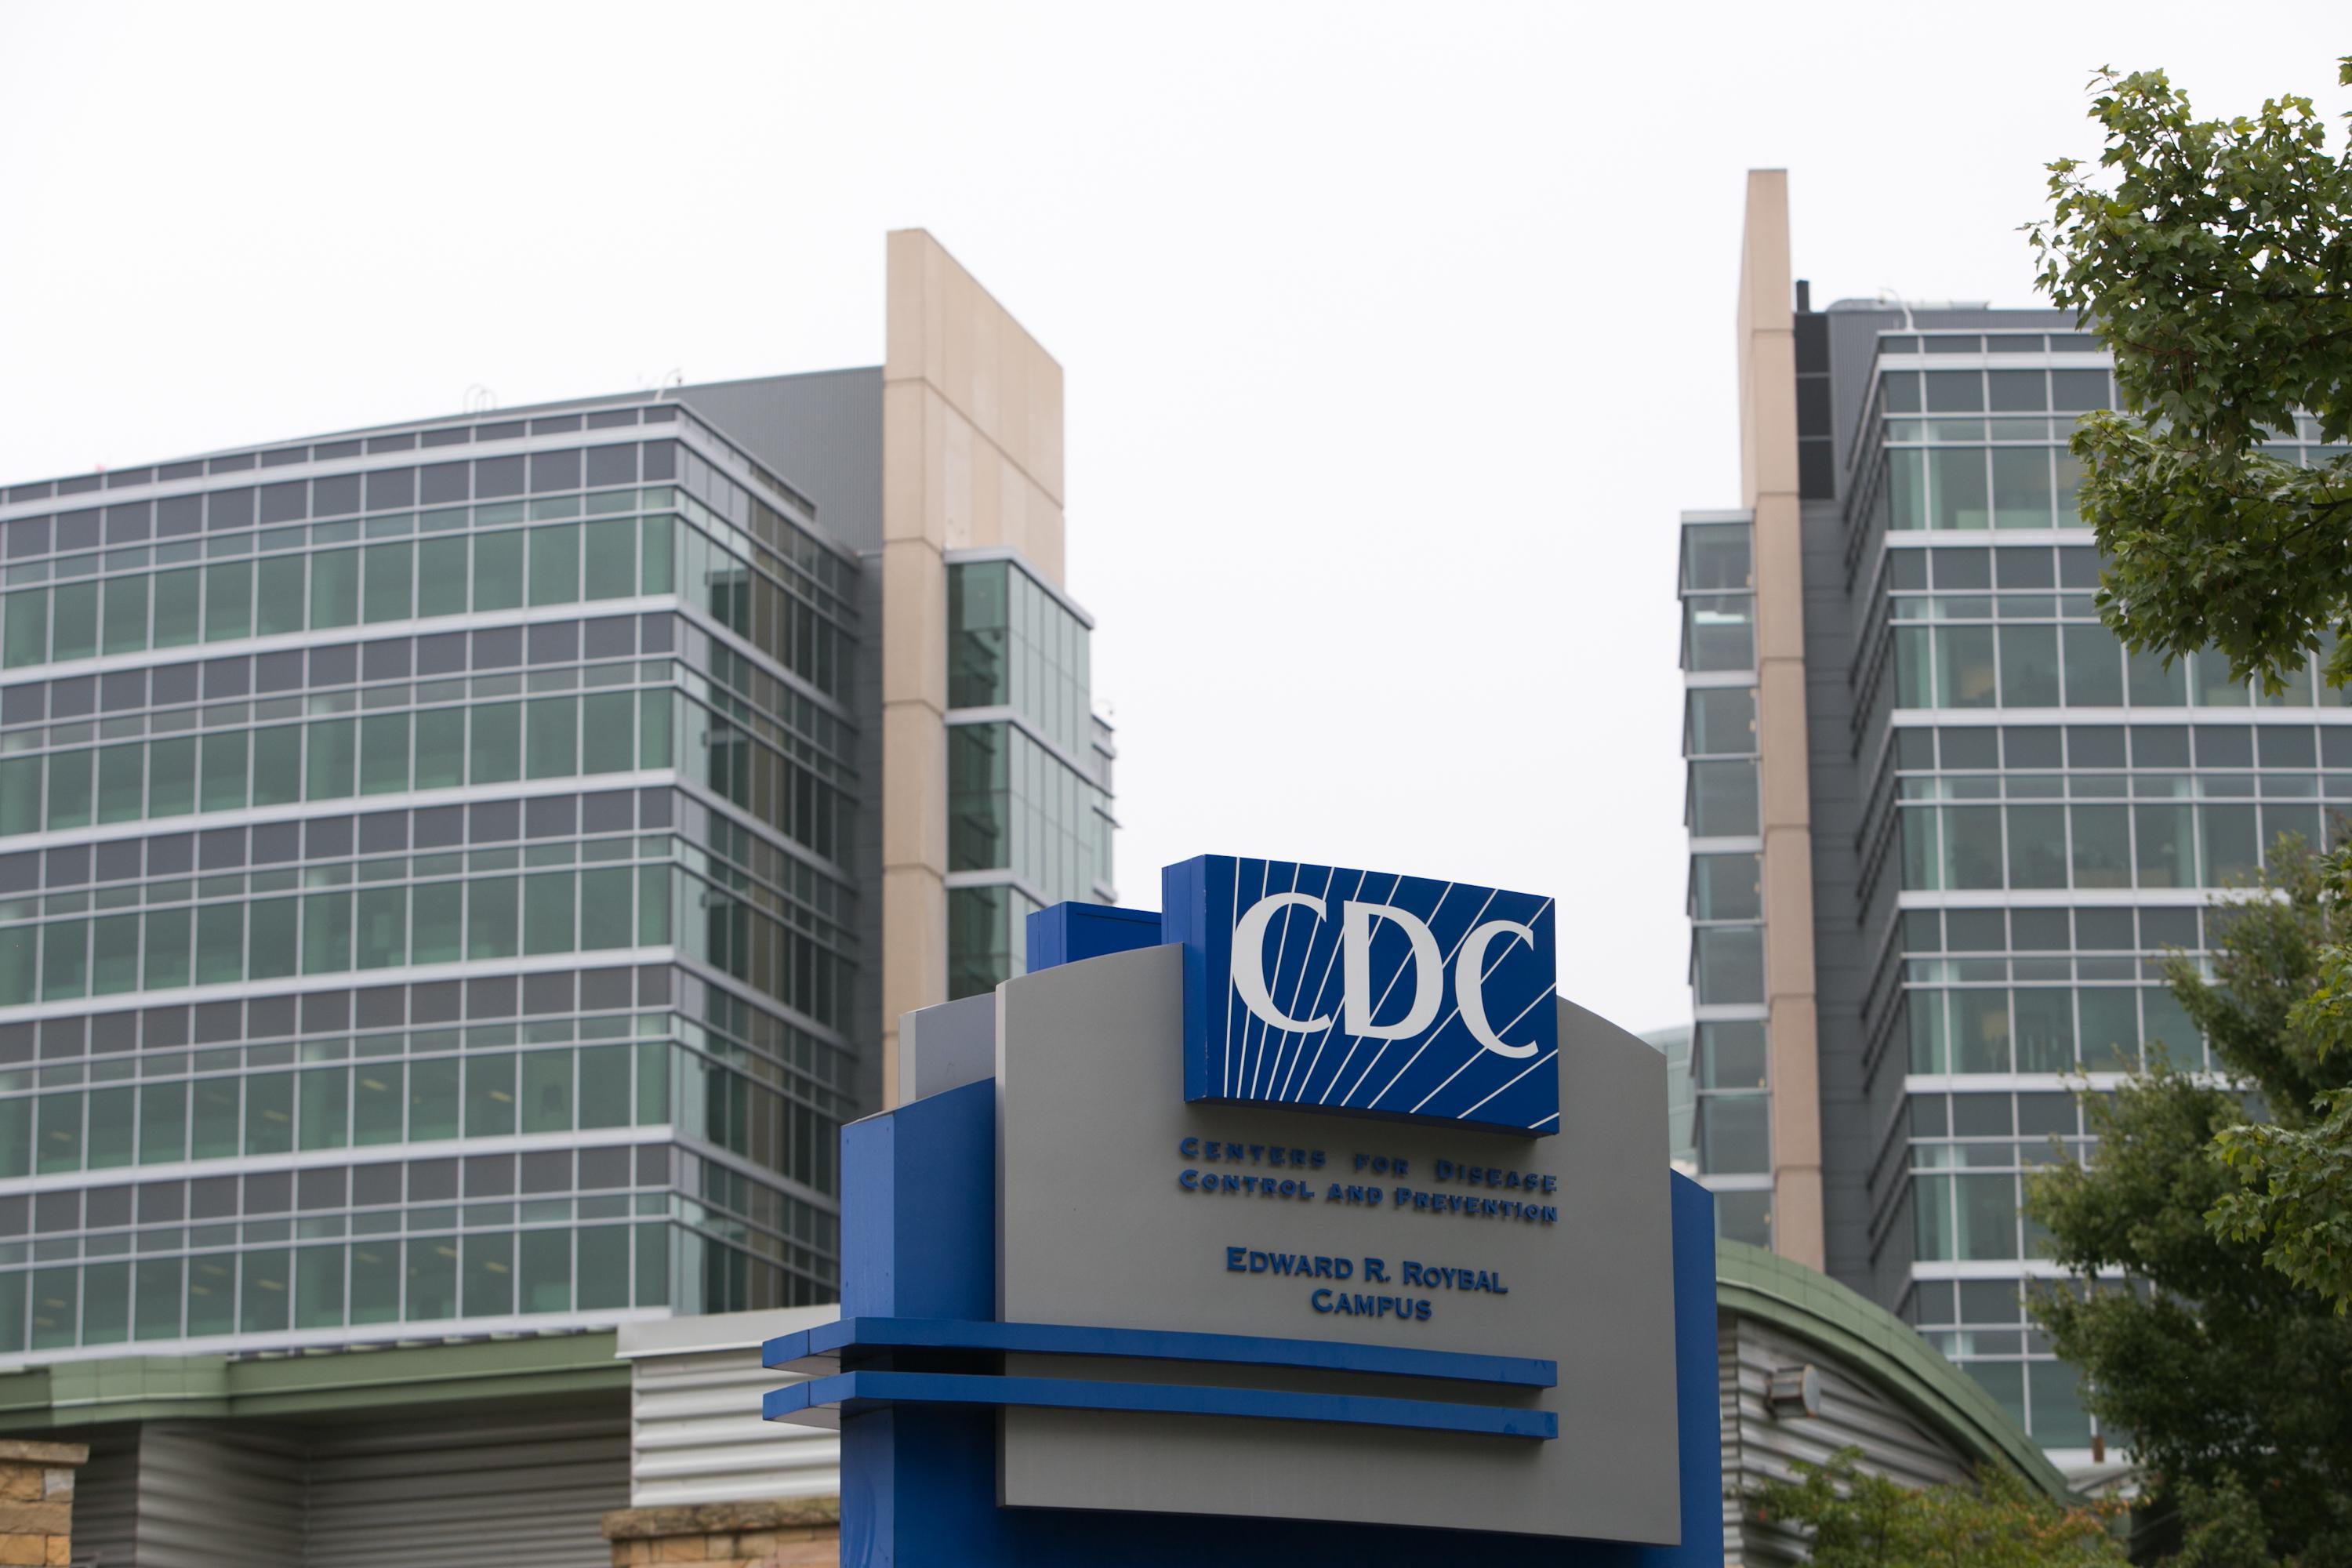 Exterior of the Centers for Disease Control (CDC) headquarters is seen on October 13, 2014 in Atlanta, Georgia. Frieden urged hospitals to watch for patients with Ebola symptoms who have traveled from the tree Ebola stricken African countries.  